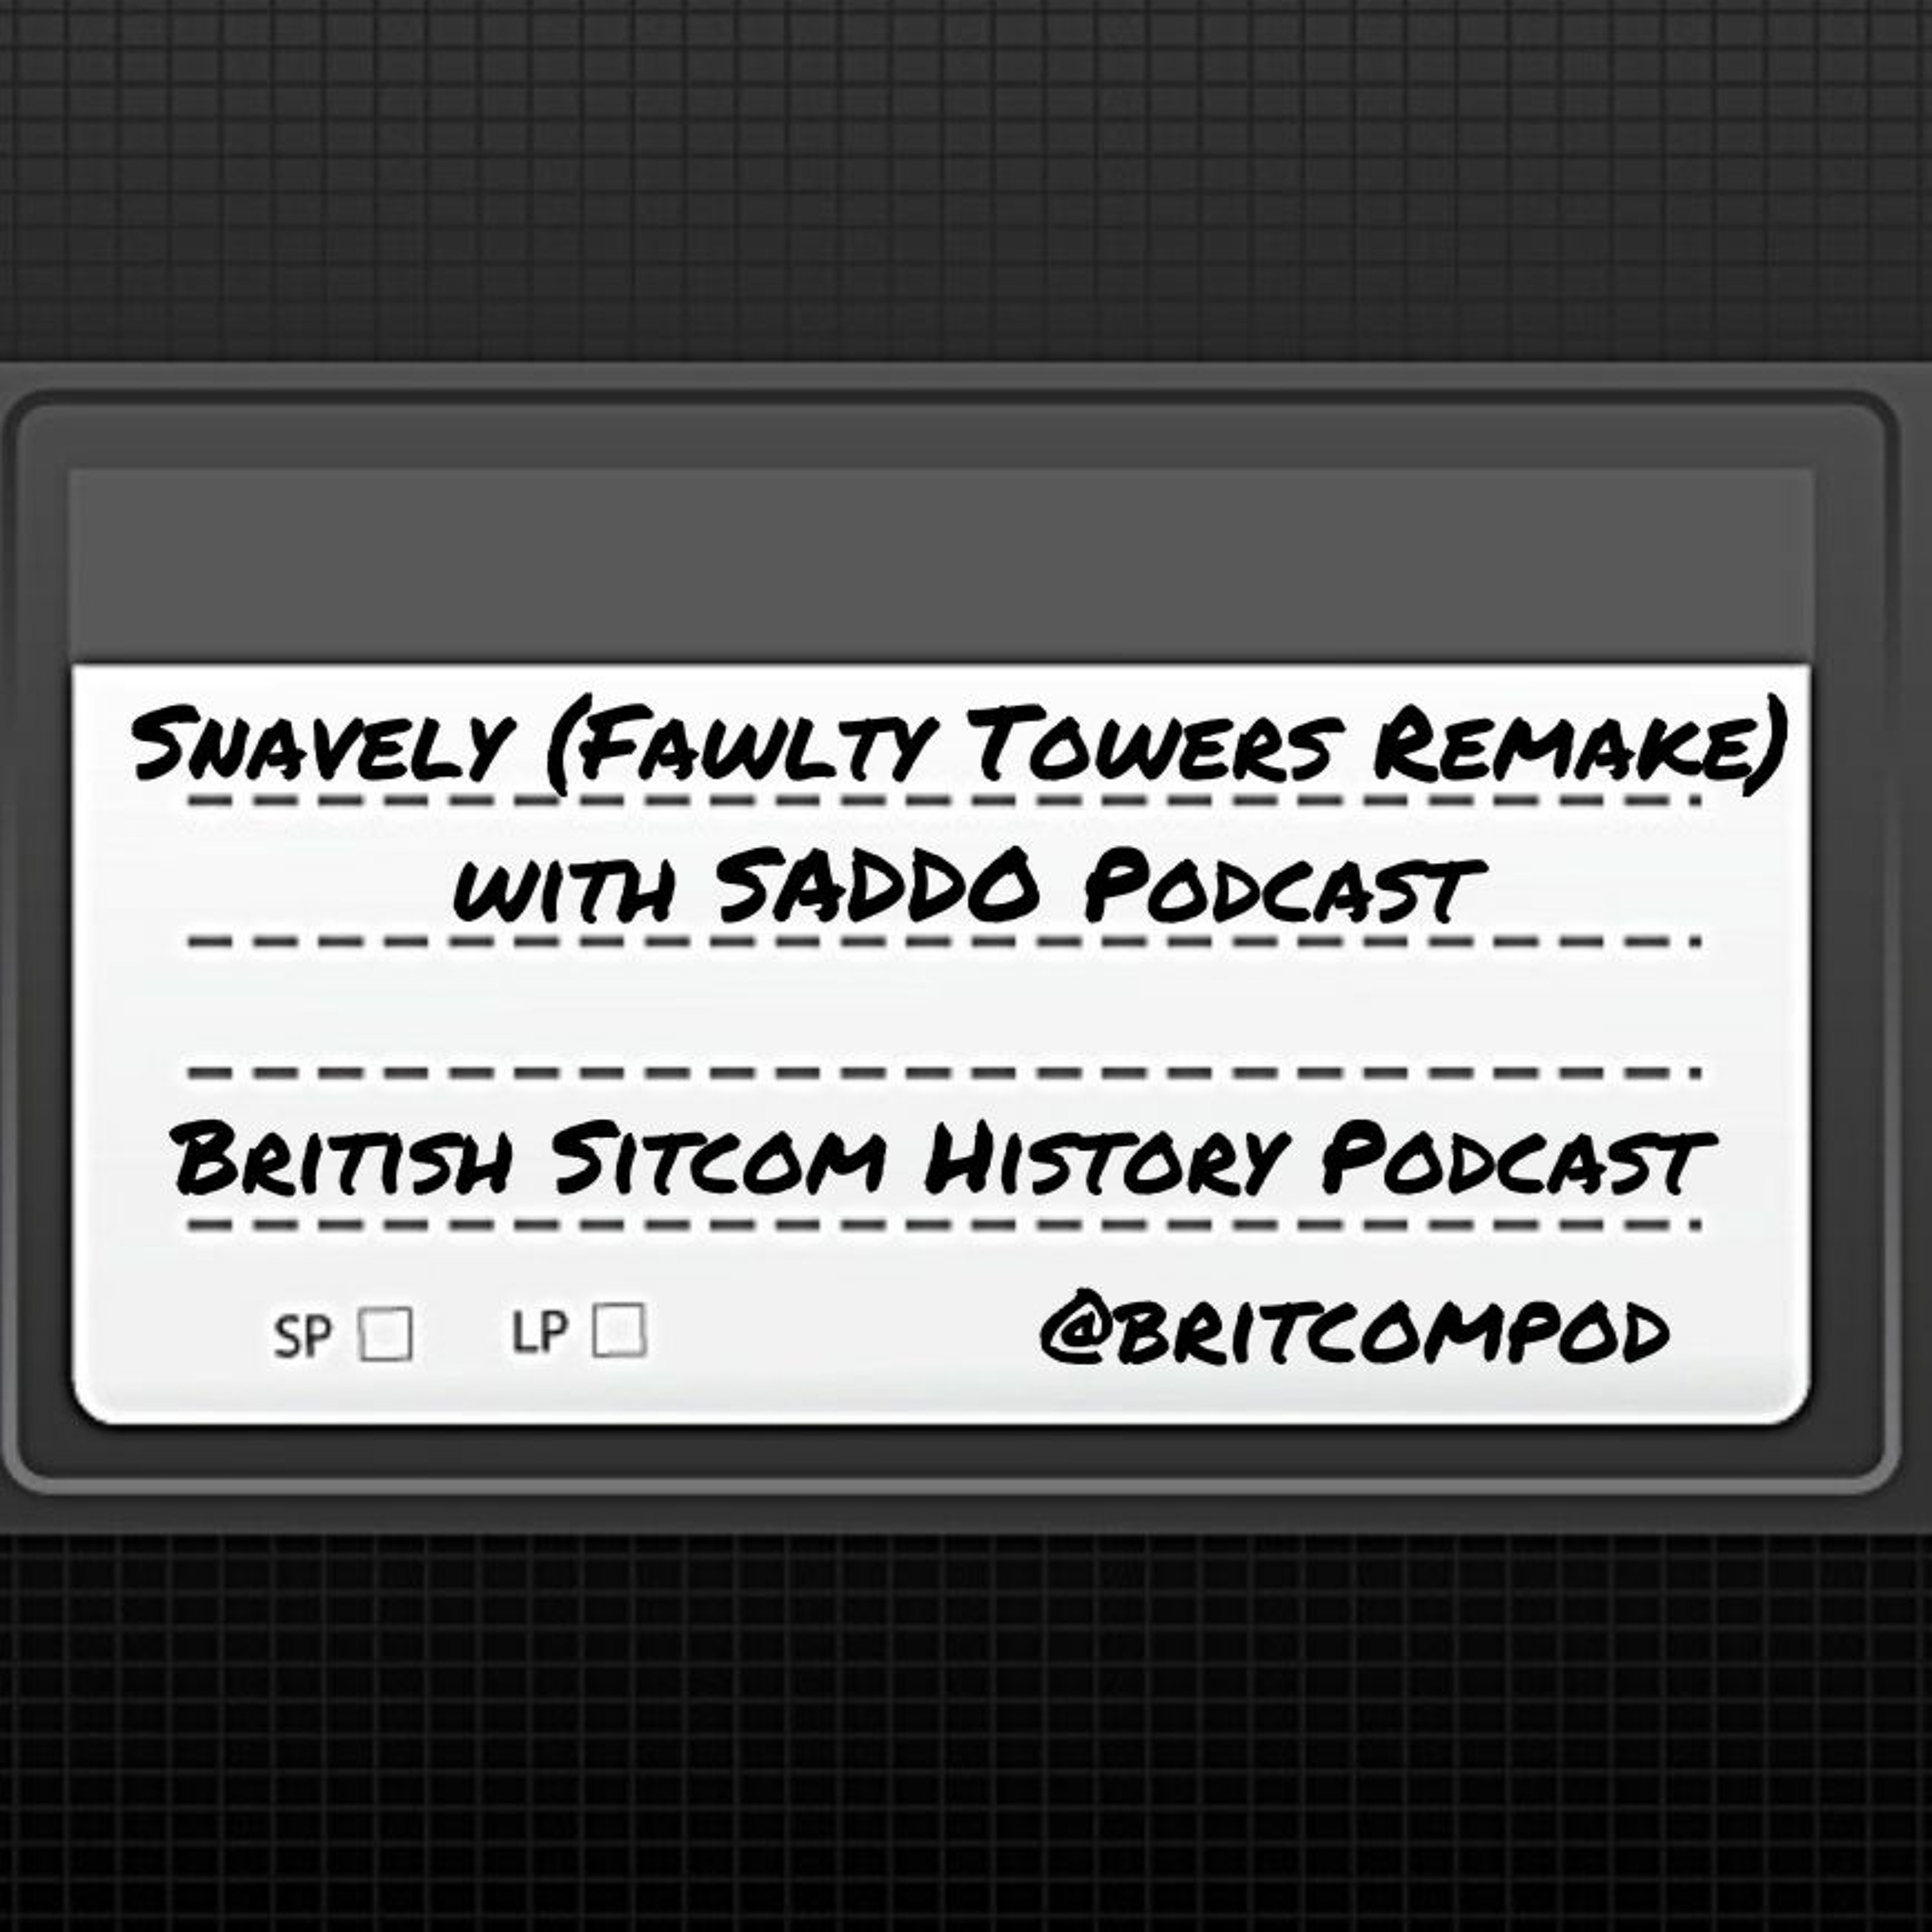 Snavely (Fawlty Towers remake) with SADDO Podcast